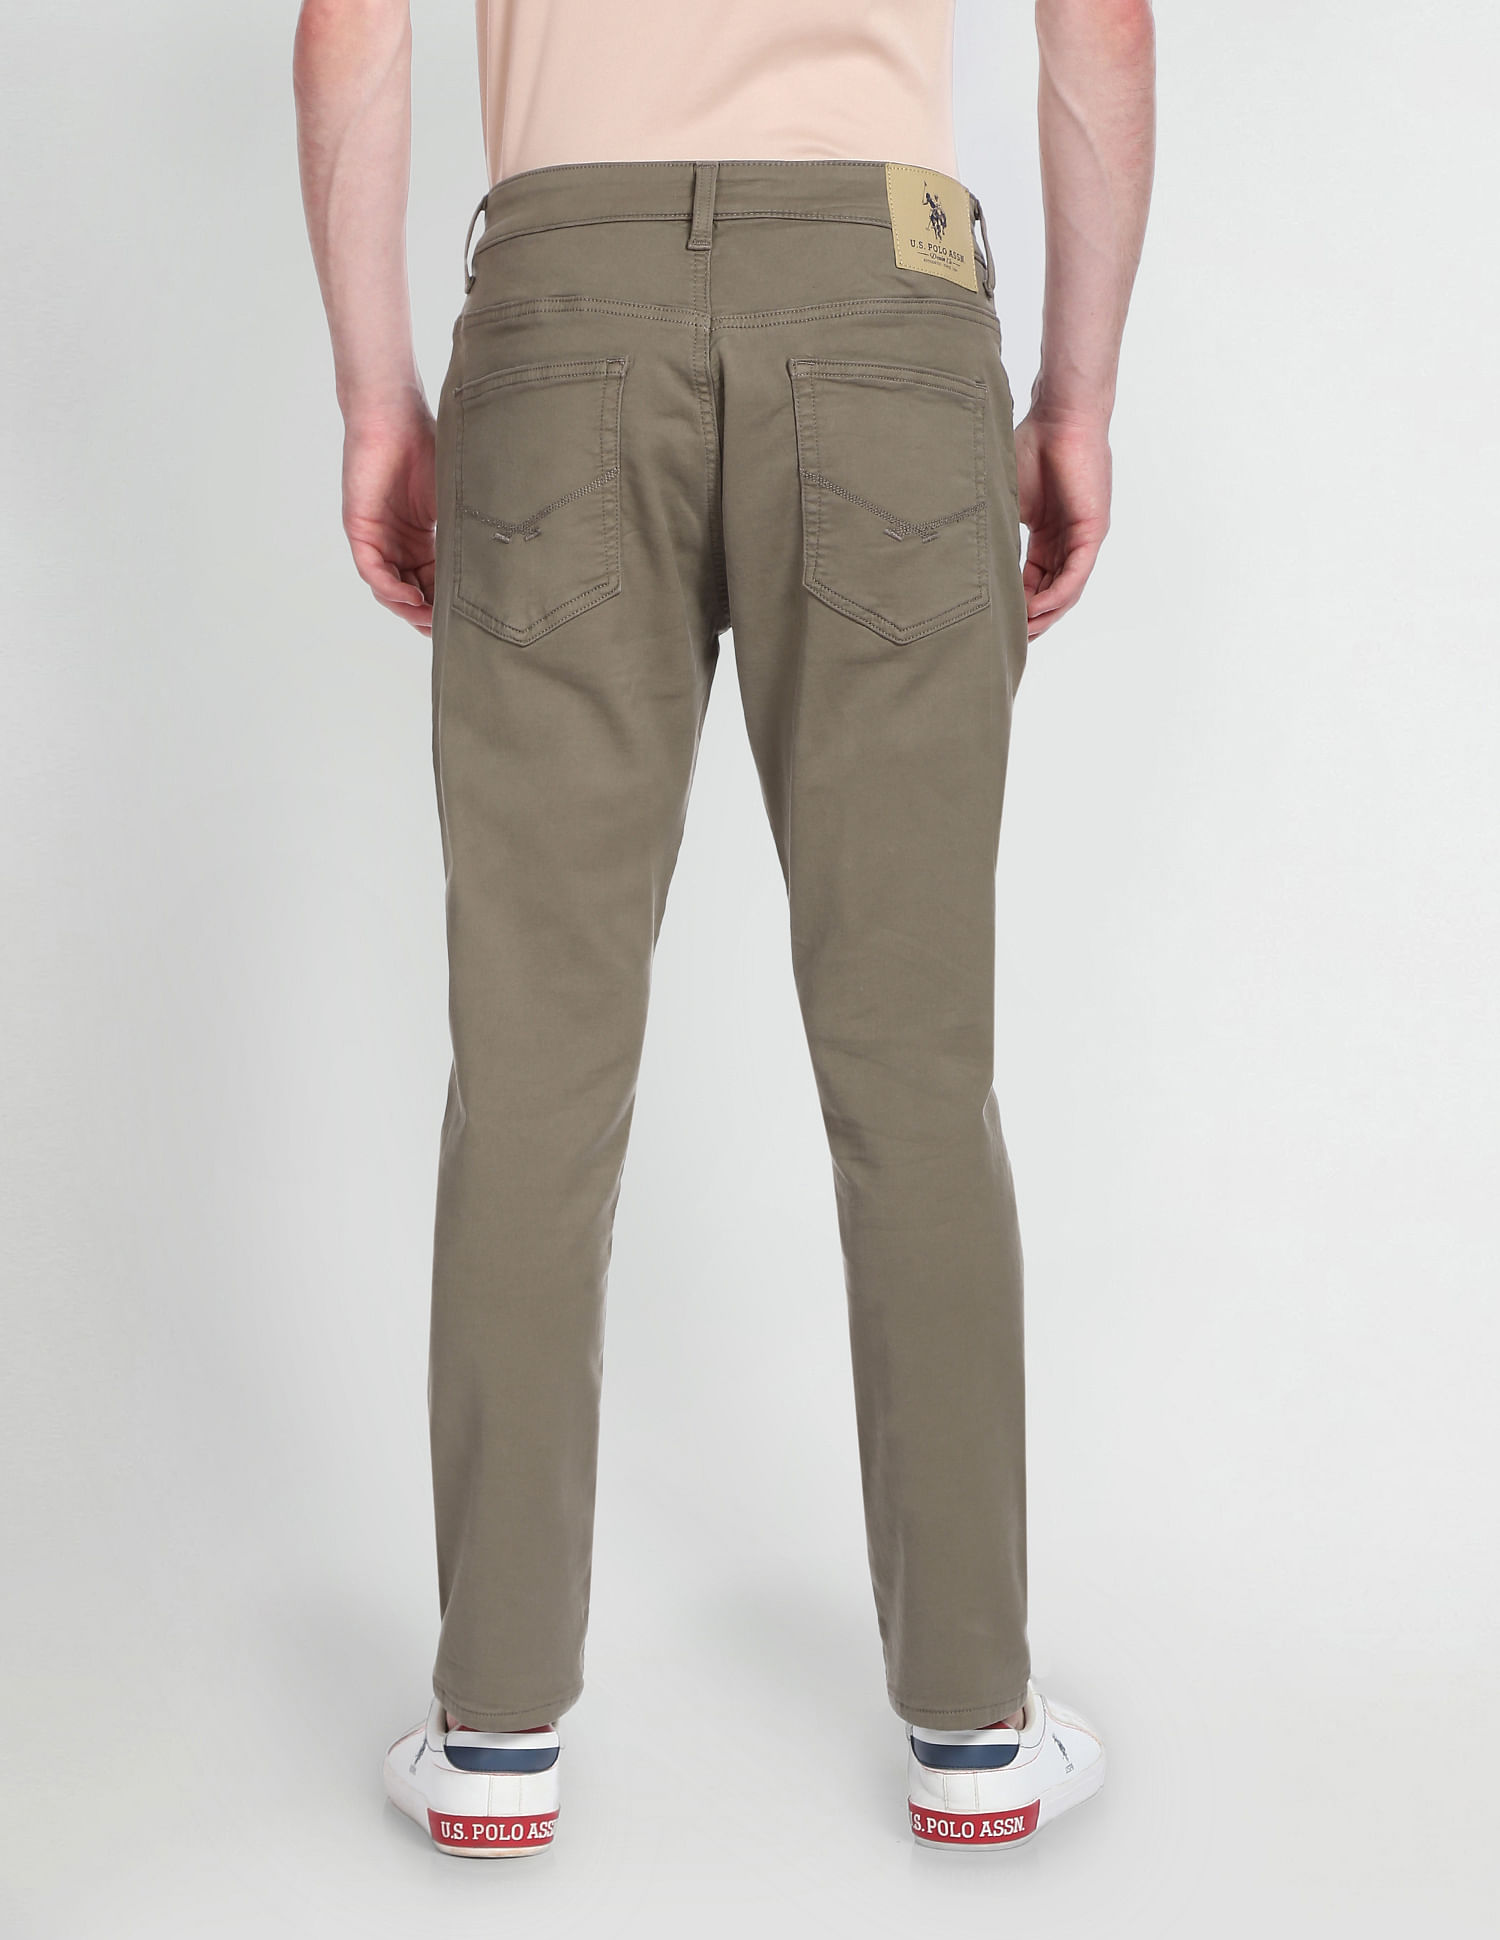 Buy U.S. Polo Assn. Denim Co. Henry Cropped Tapered Fit Olive Jeans - NNNOW. com